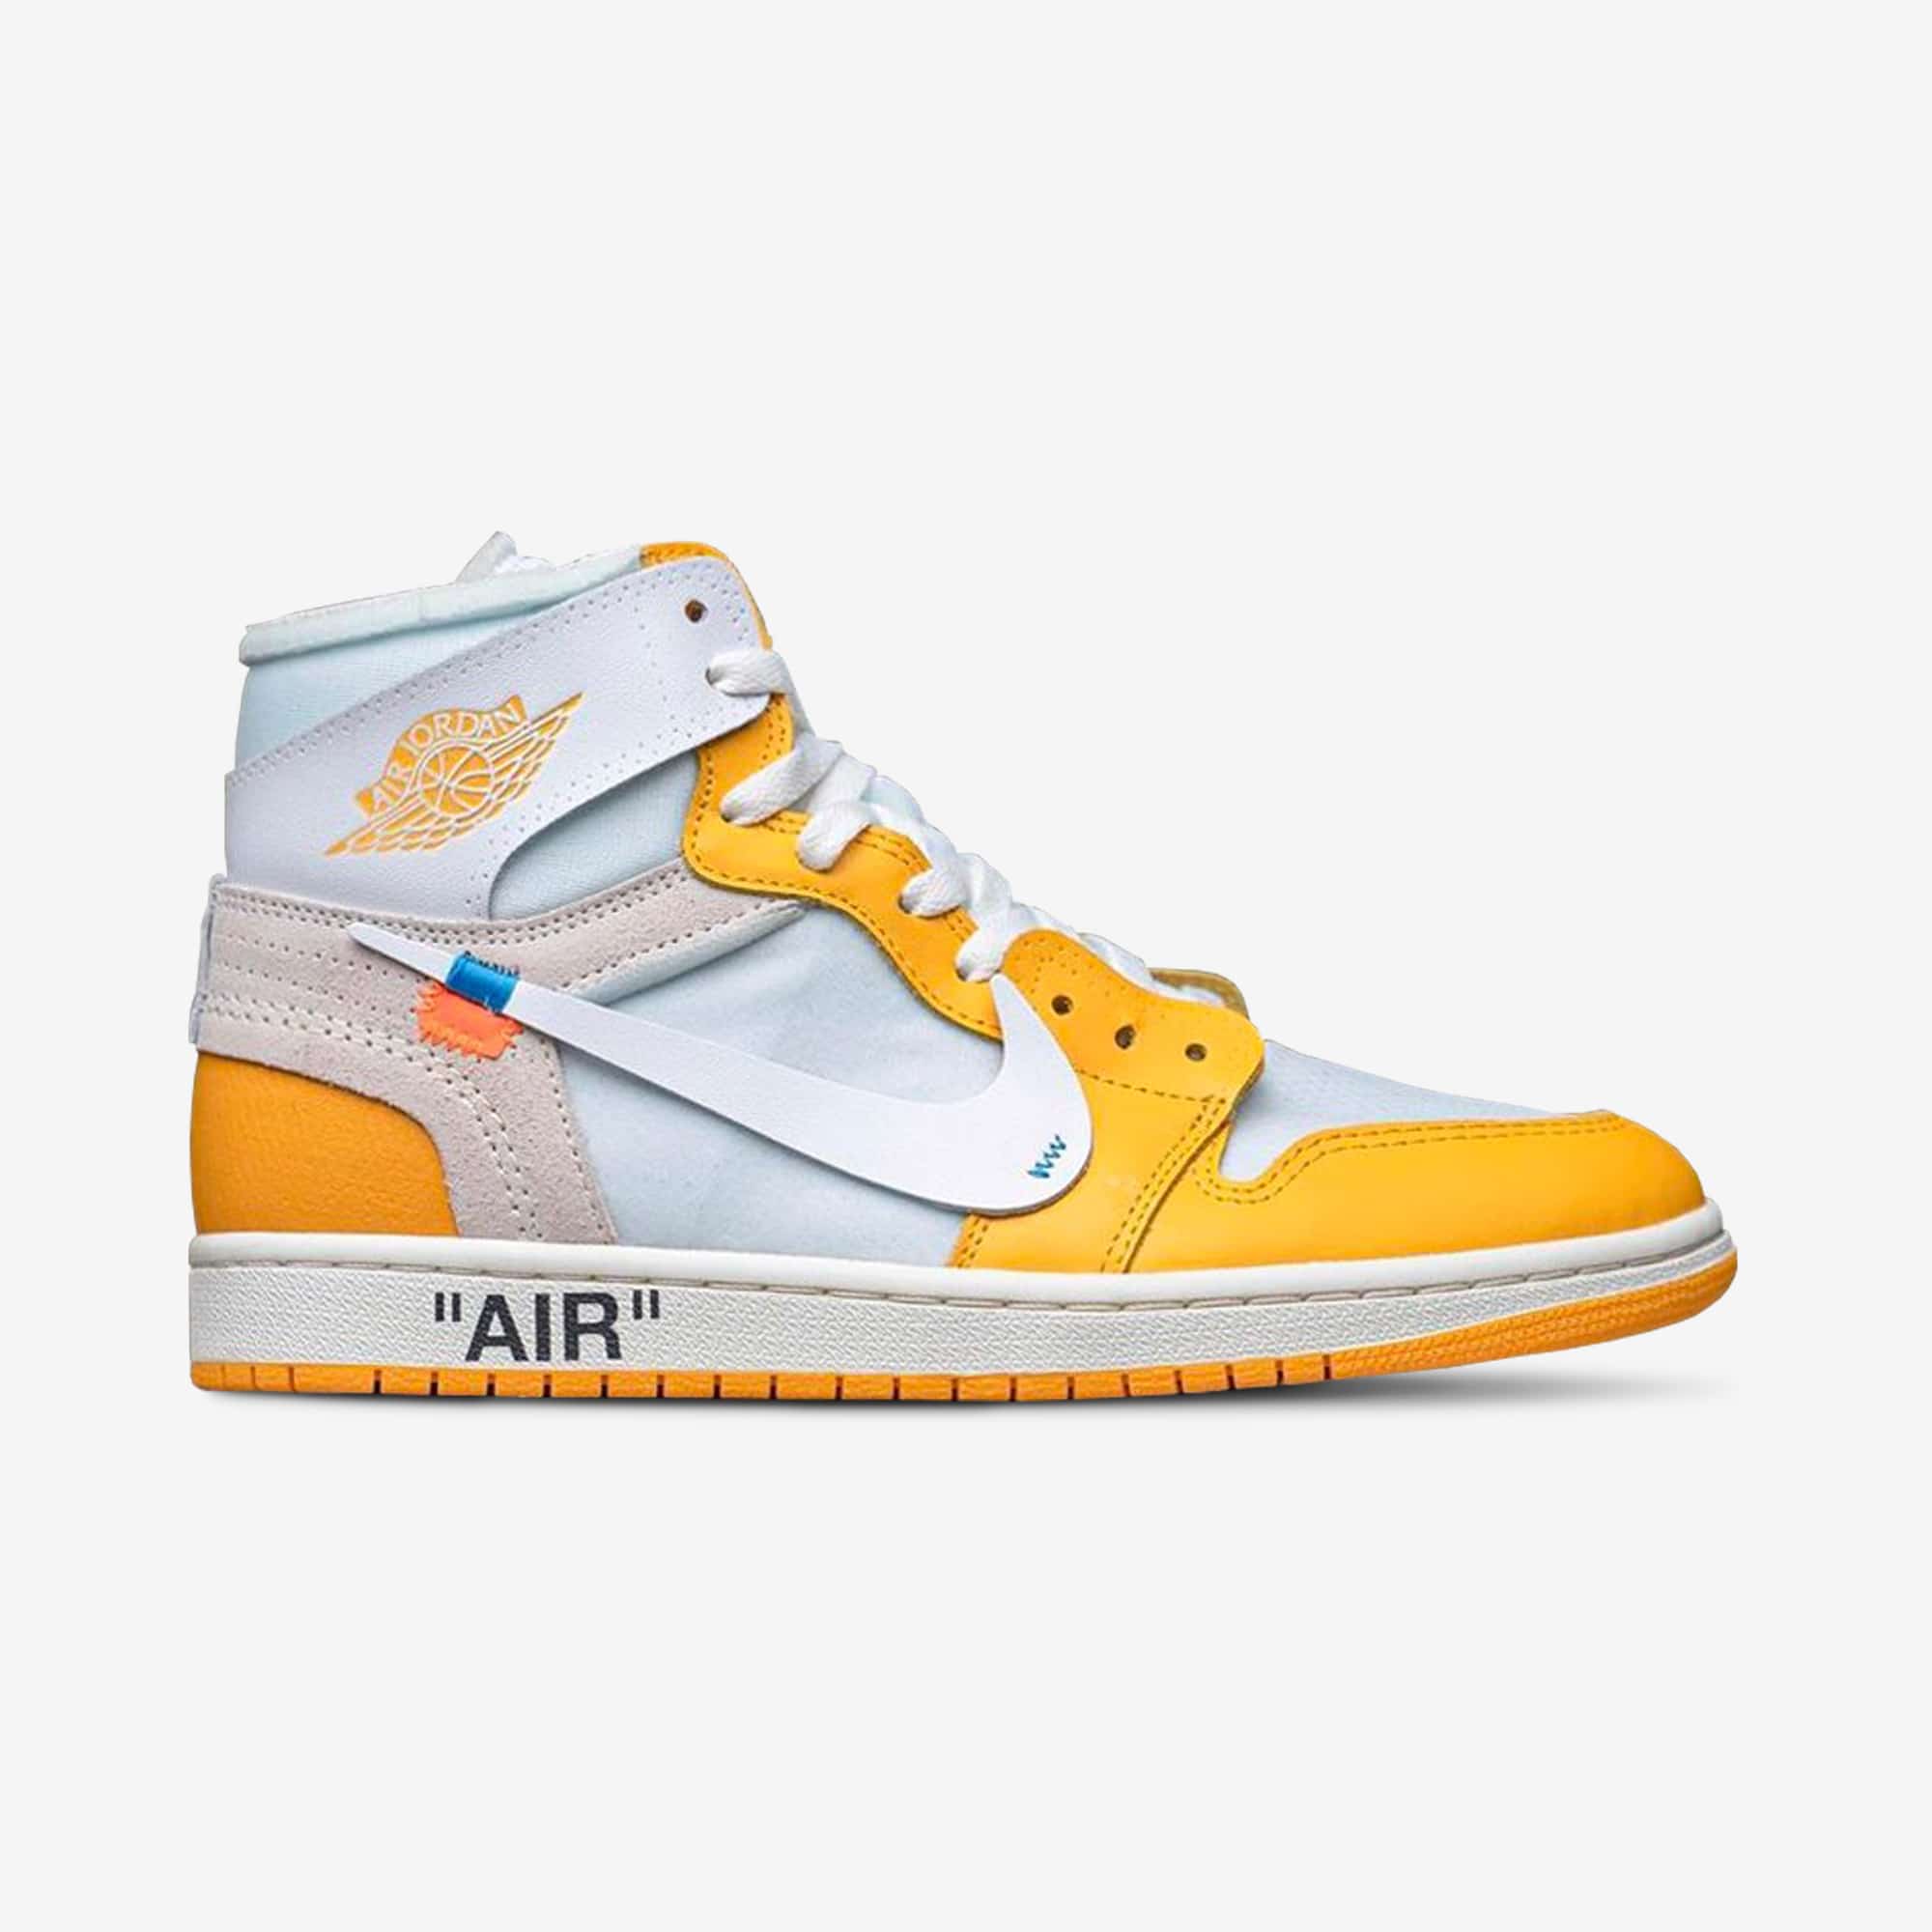 off white air jordan 1 canary yellow price